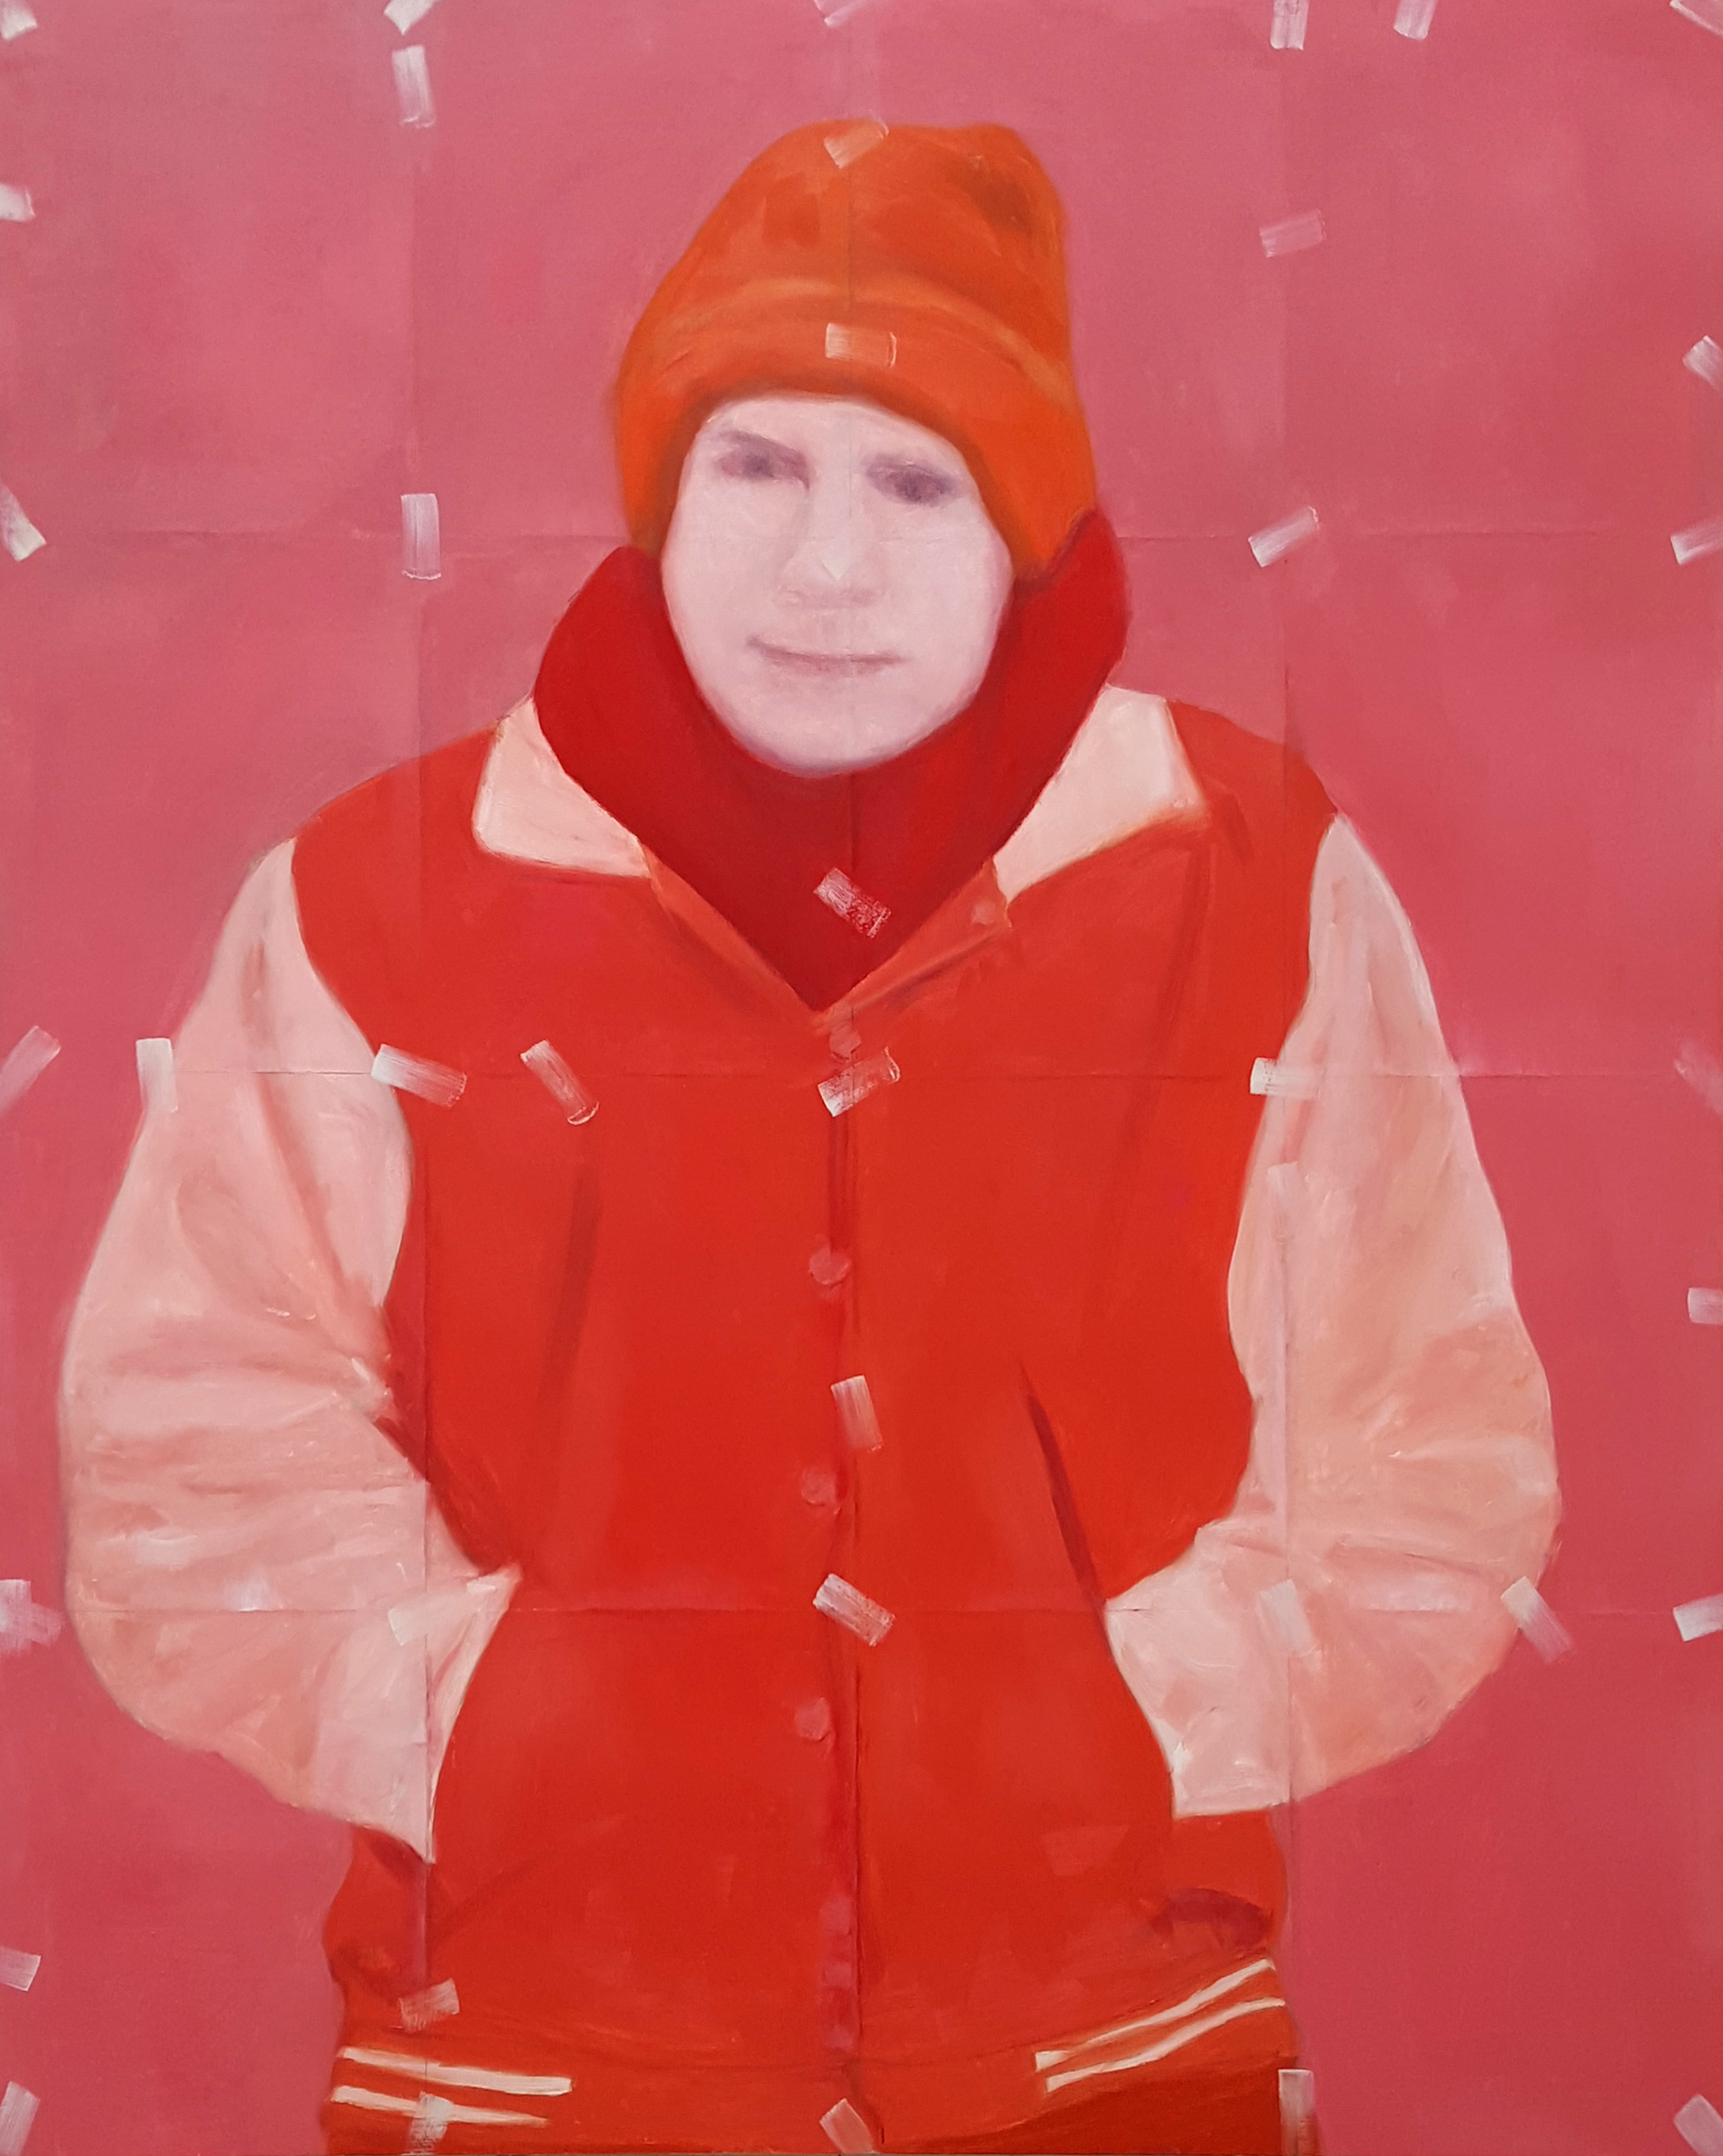 red monochrome oil painting portrait of a bundled up man on a cold day